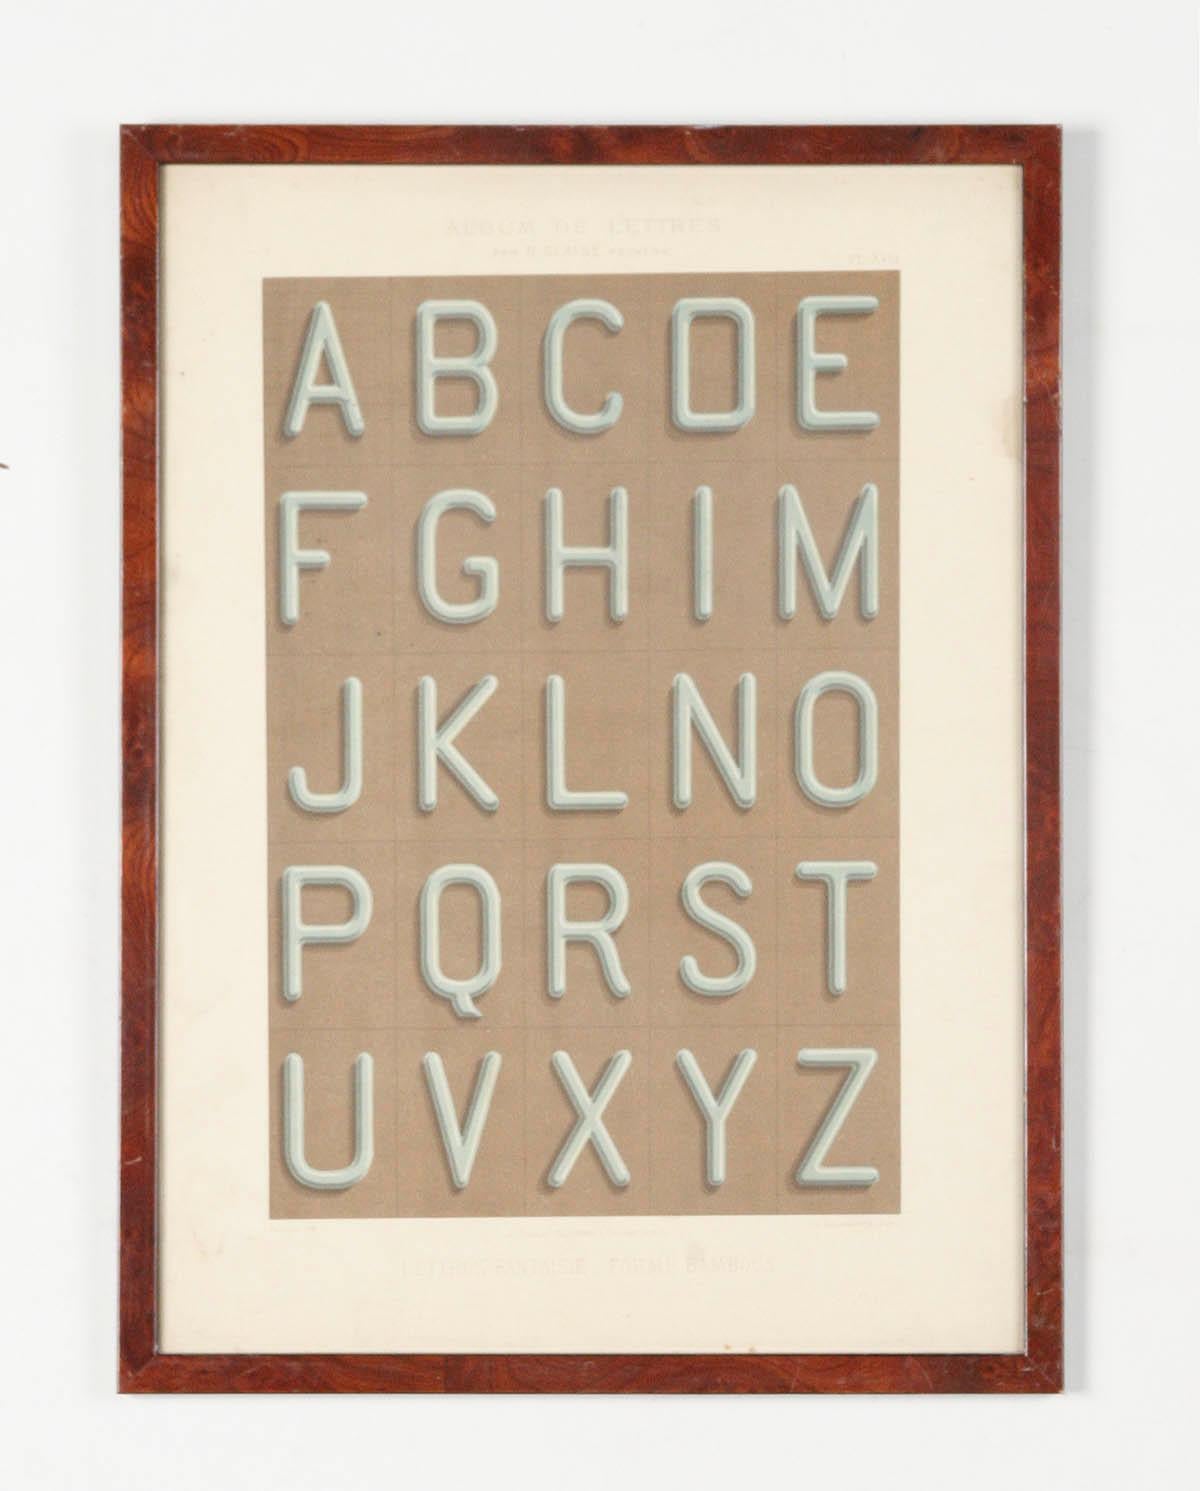 Nice set of 13 alphabet prints. These prints are part of a large collection of fonts that were used to design lettering on facades, windows and billboards.
You can also see this by the first letter, which is always placed in a grid, so that the